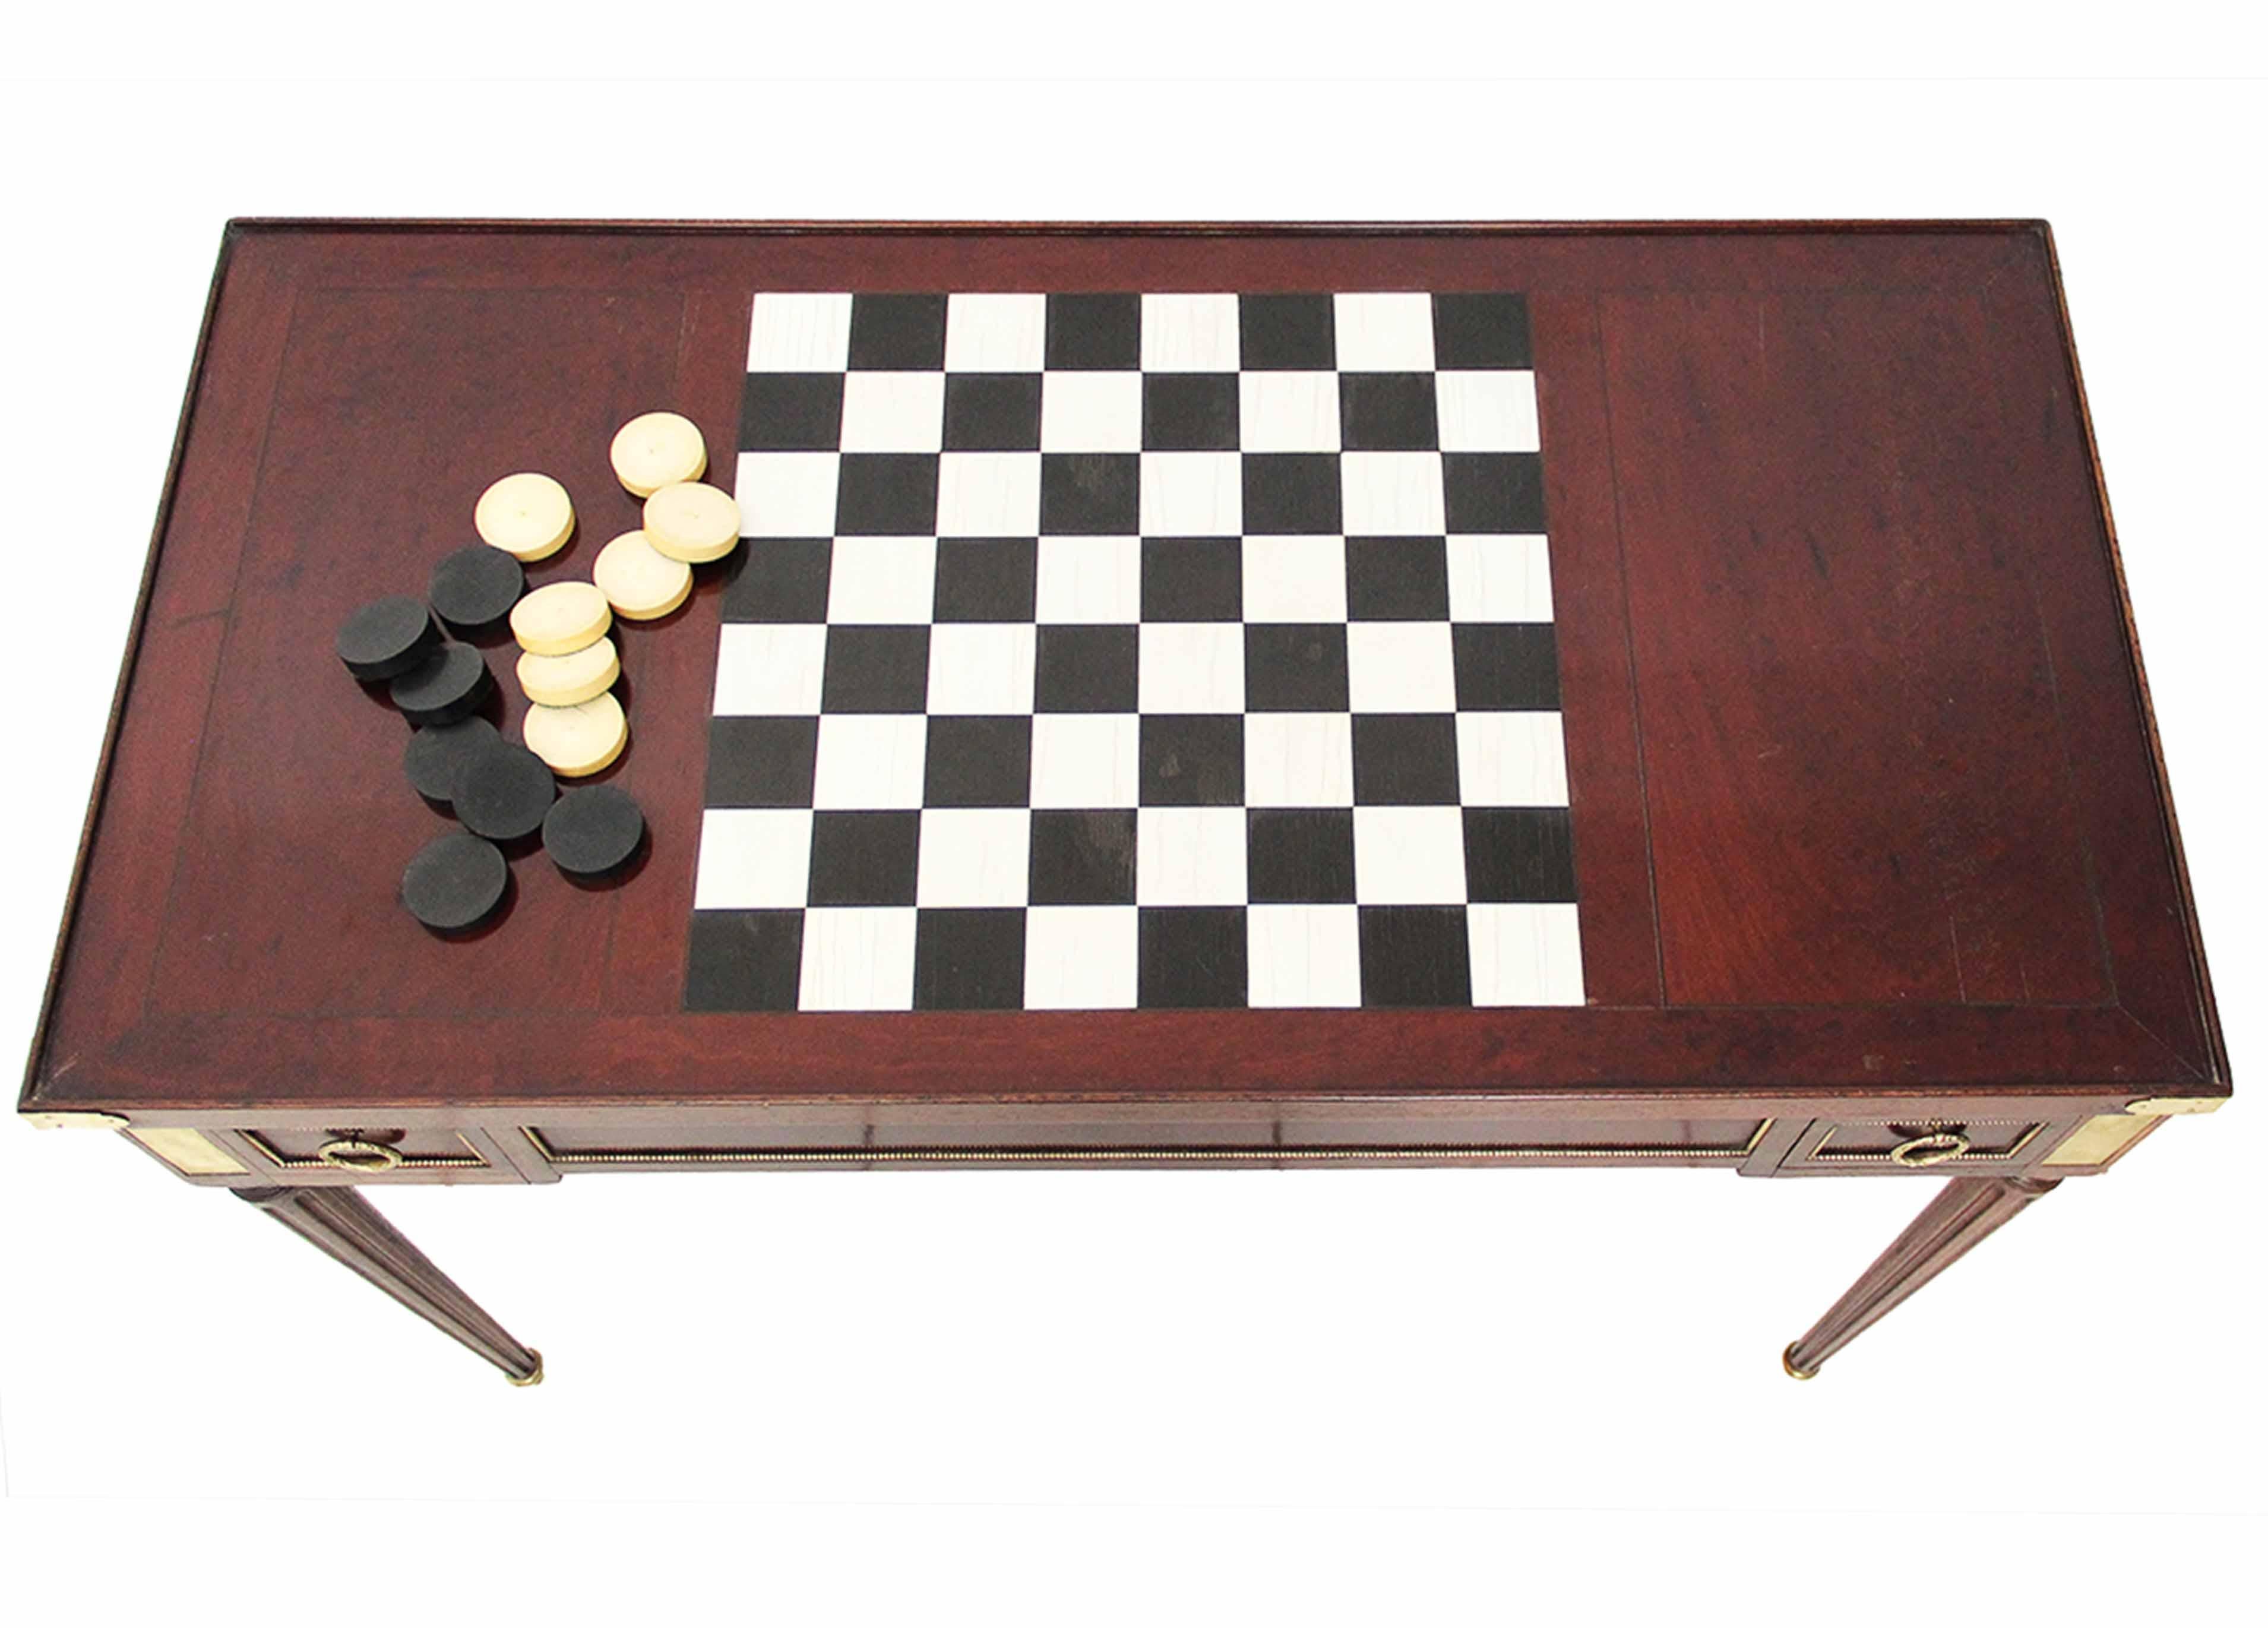 18th century Louis XVI game table in mahogany with backgammon and checkerboard
Beautiful game table in mahogany. The tray, entirely removable, reveals a backgammon game inside. 
Reversible, it is decorated with a green leather tray on the front